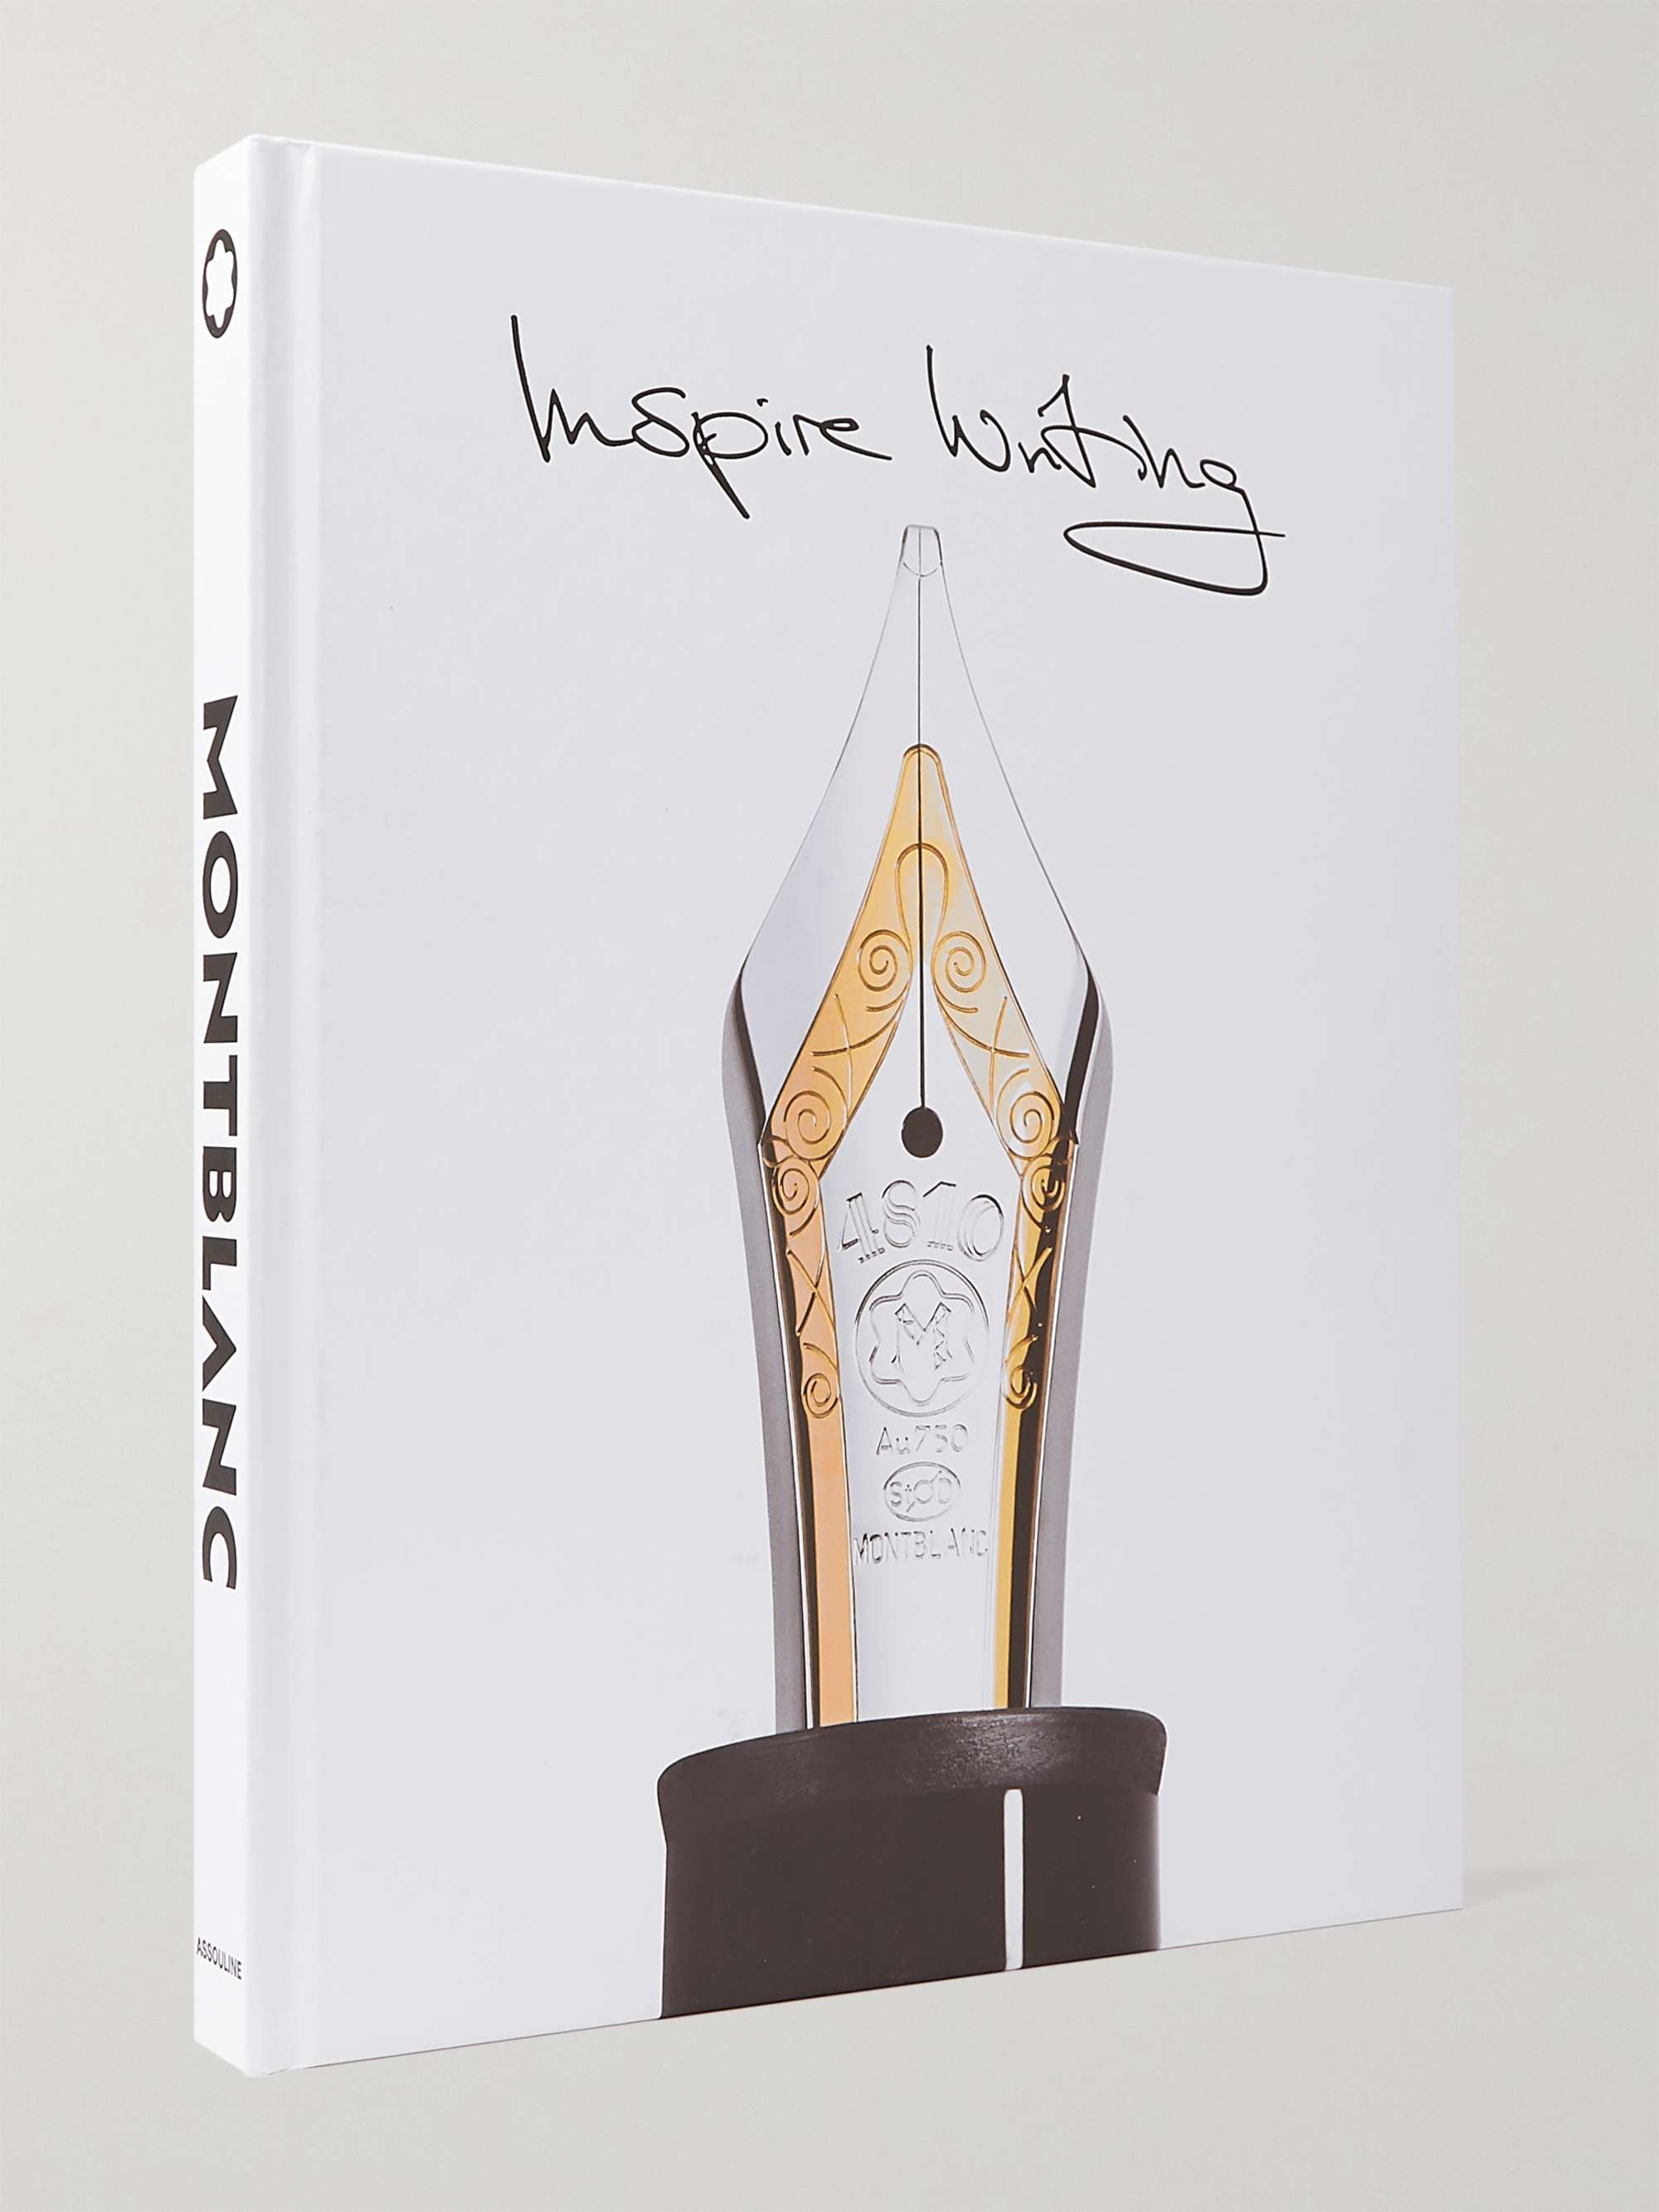 ASSOULINE Montblanc: Inspire Writing Hardcover Book